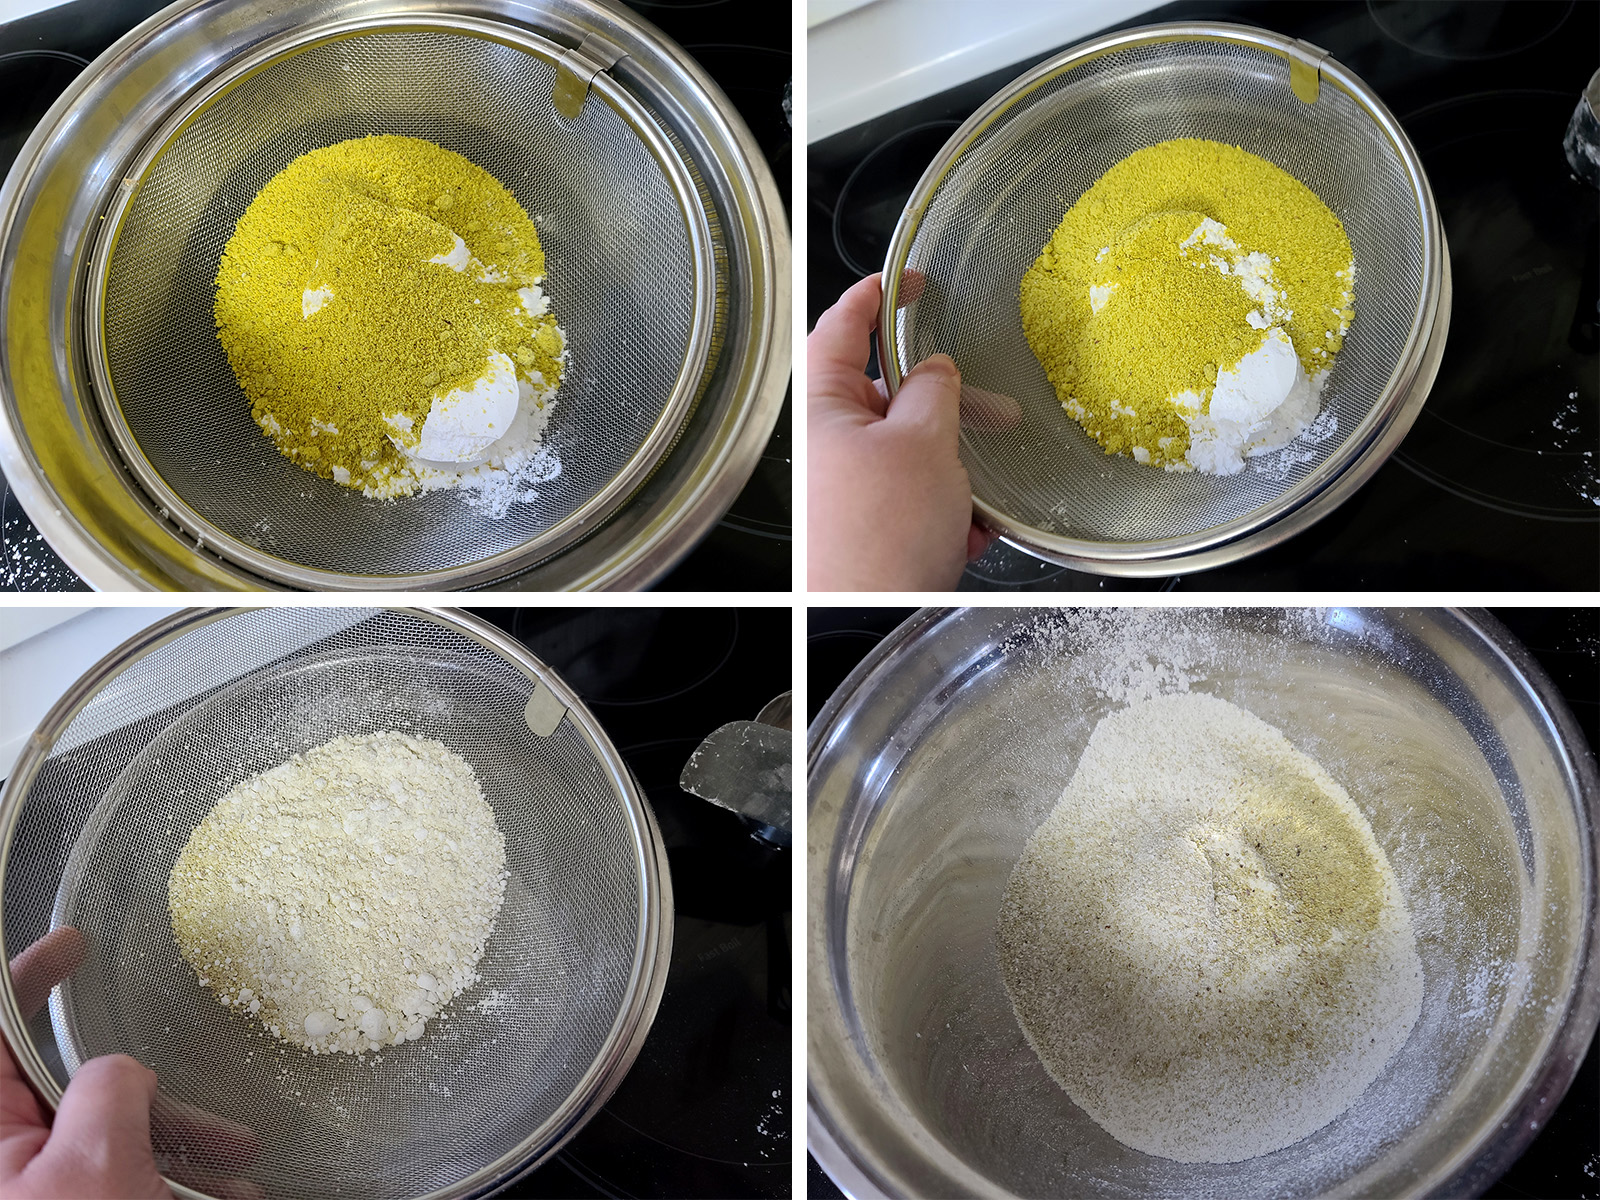 Powdered sugar and pistachio flour being sifted into a metal bowl.